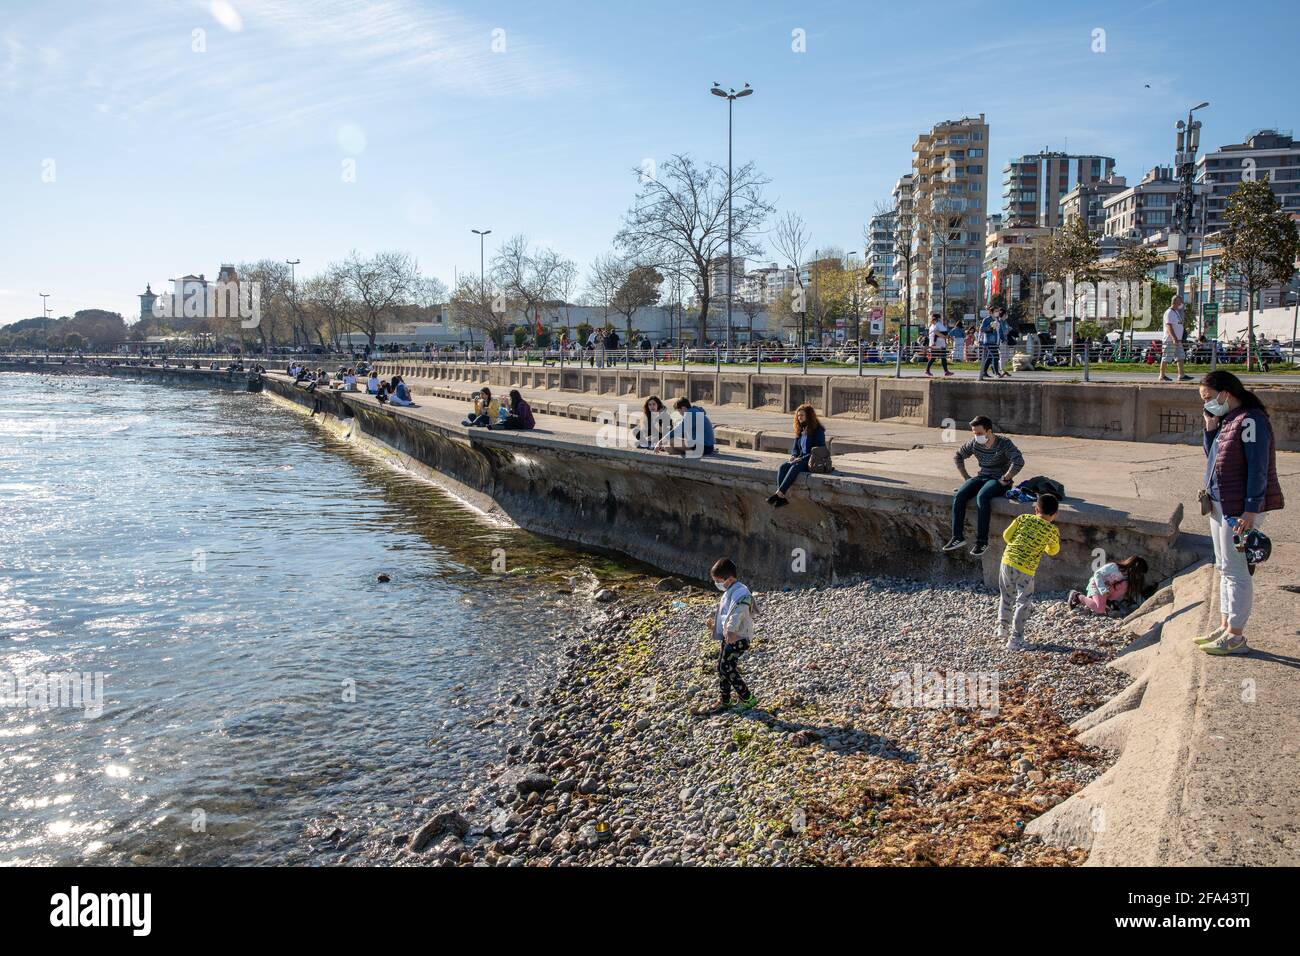 People enjoying beautiful day and sun on Bostanci coasts during pandemic outbreak days before curfew in Kadikoy, Istanbul, Turkey on April 22, 2021. Stock Photo